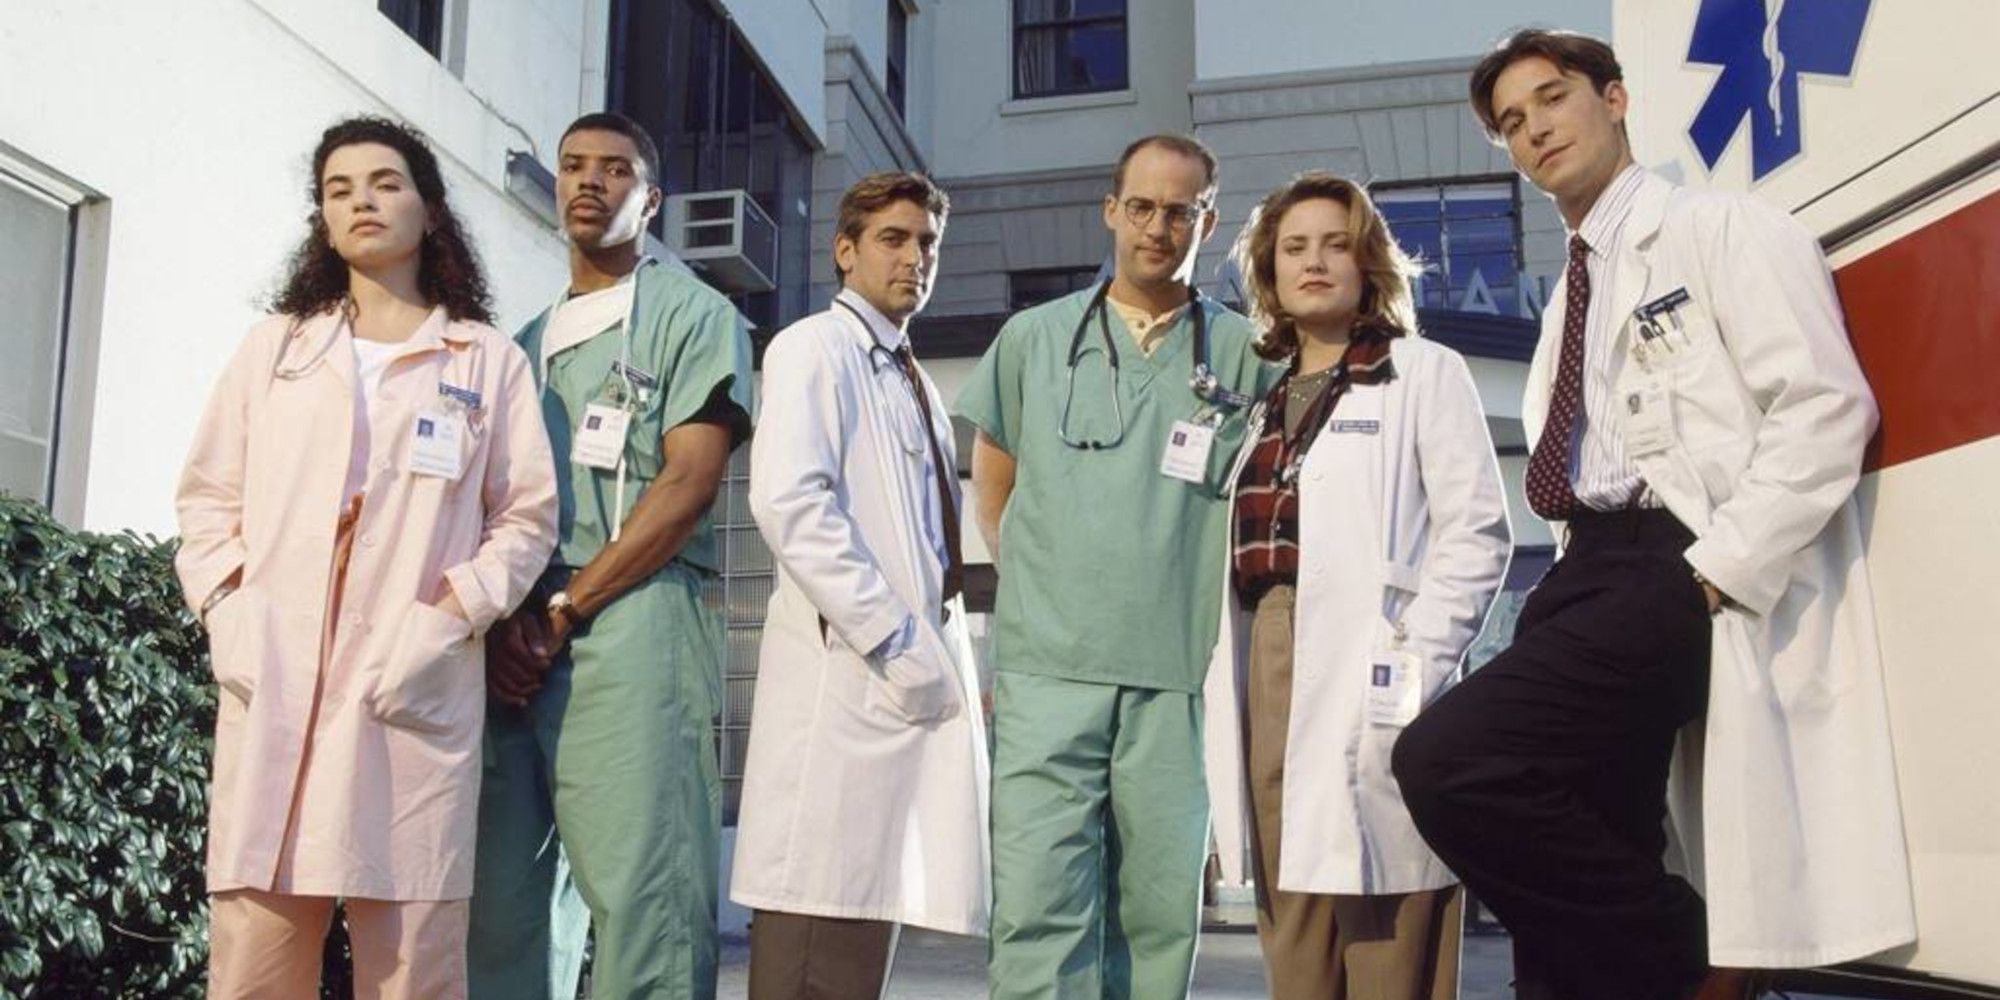 The resident doctor staff during the first season of NBC's ER